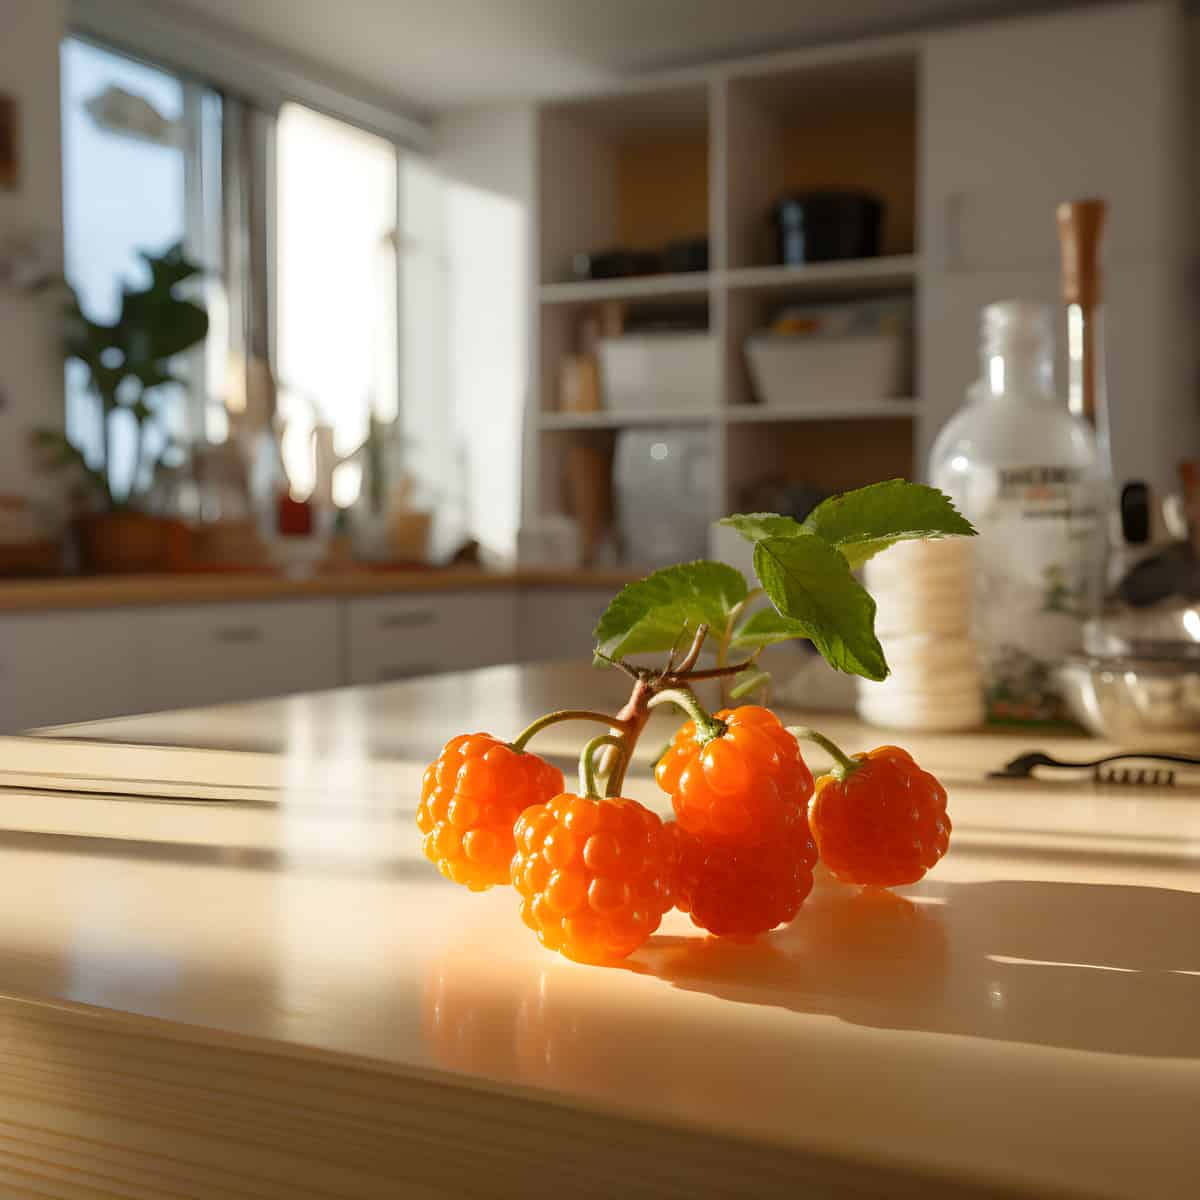 Cloudberry on a kitchen counter